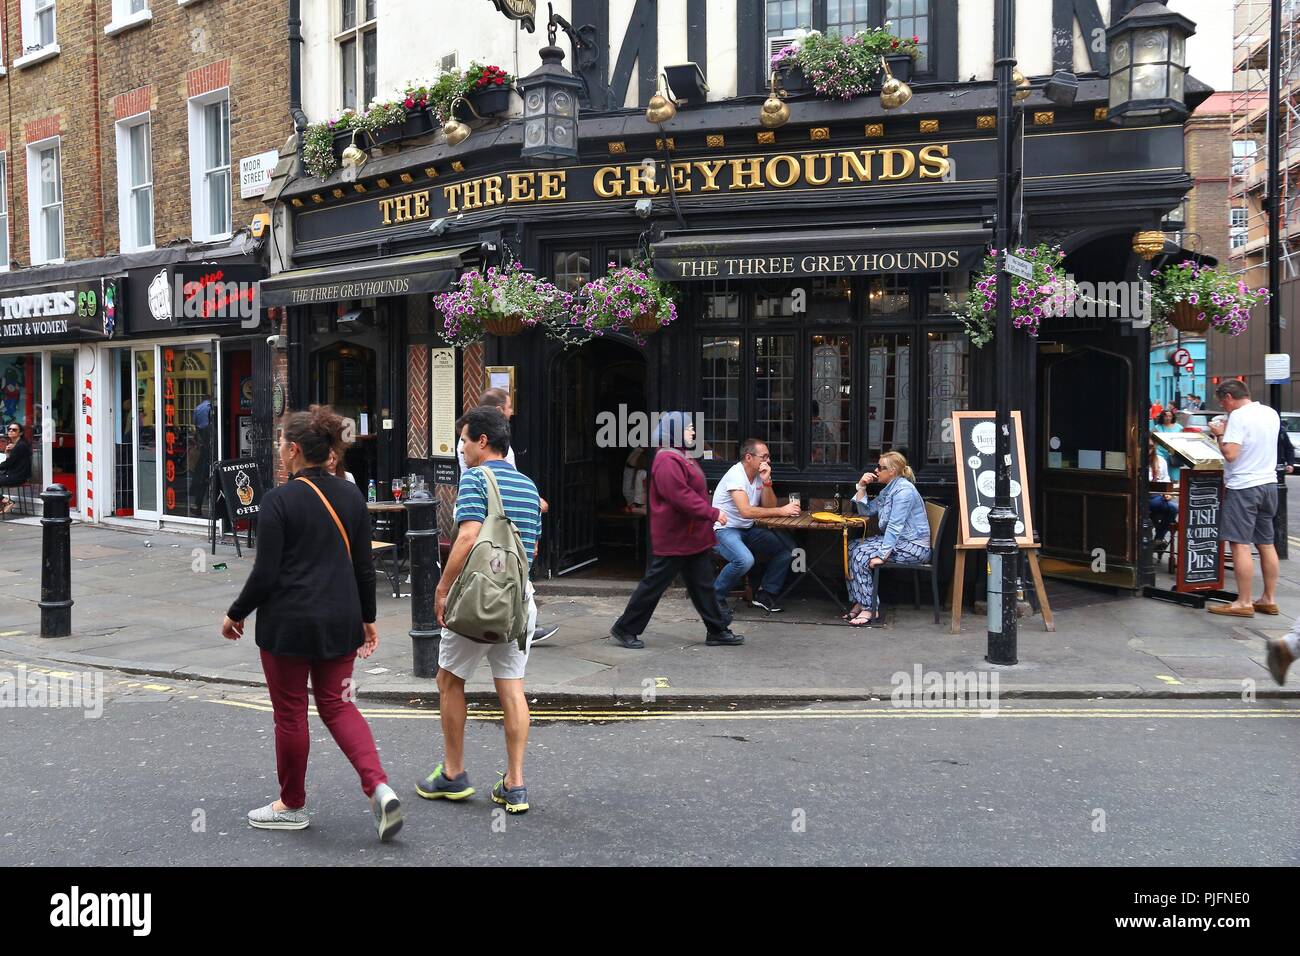 LONDON, UK - JULY 9, 2016: People visit The Three Greyhounds pub in Soho, London. There are more than 7,000 pubs in London. Stock Photo